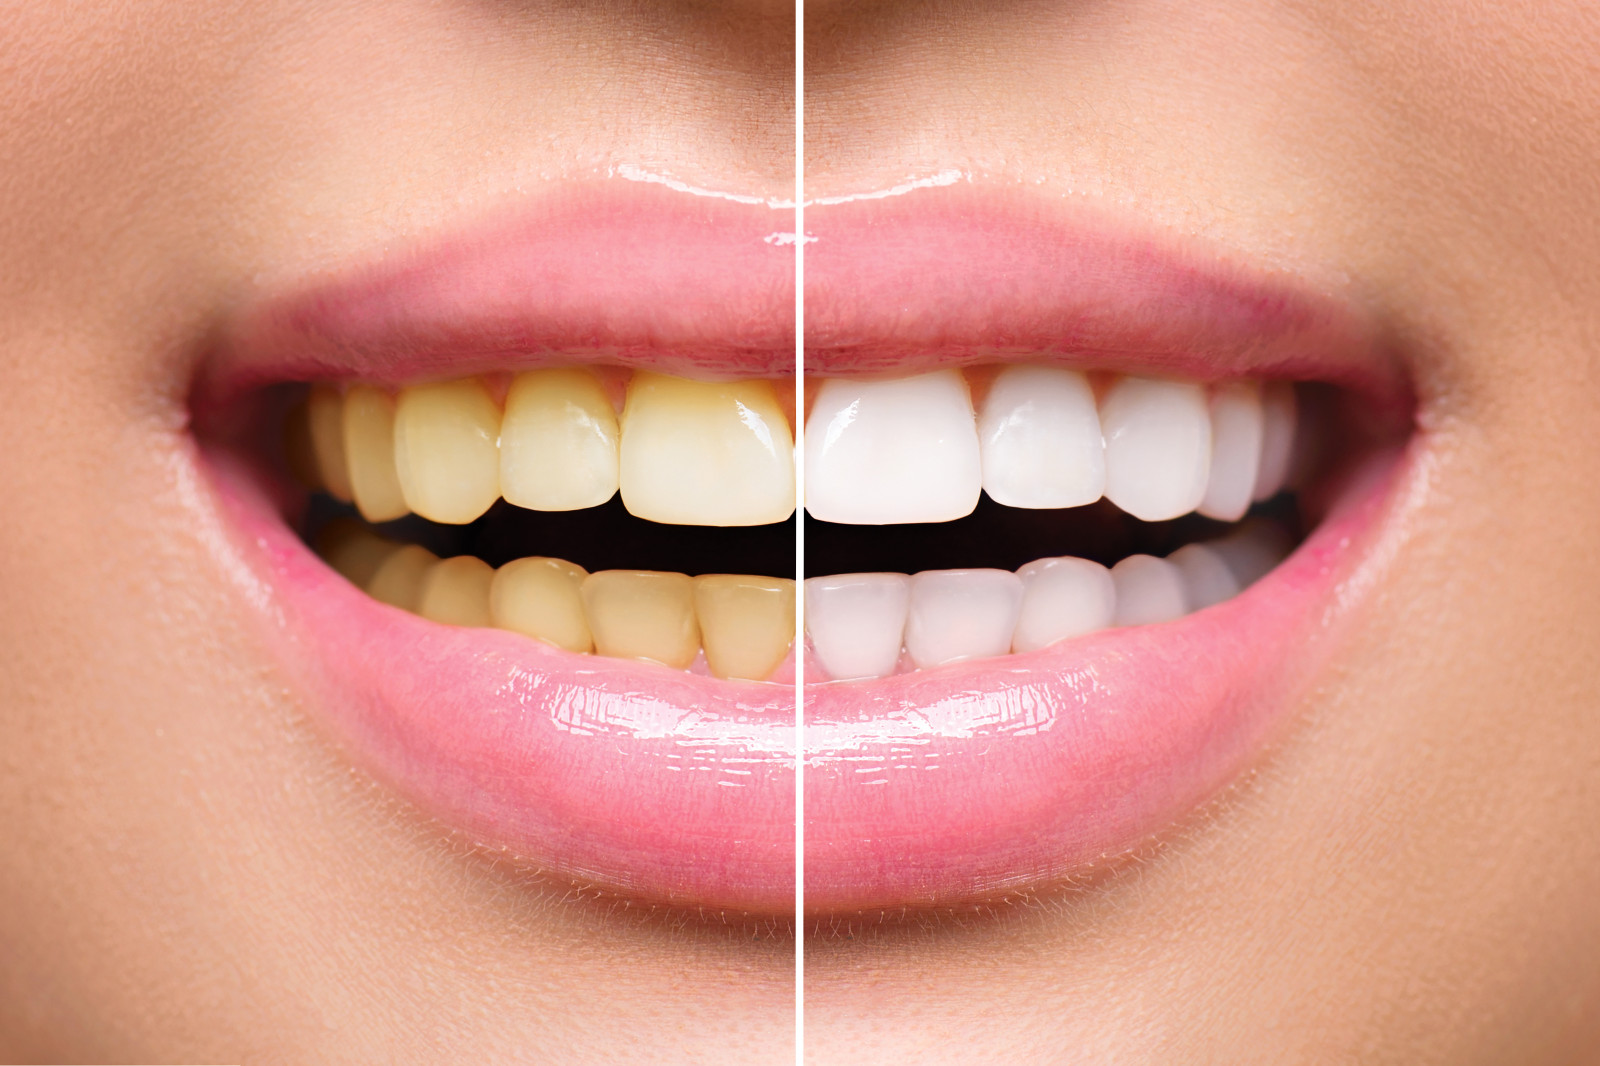 THE PROS AND CONS OF PROFESSIONAL TEETH WHITENING